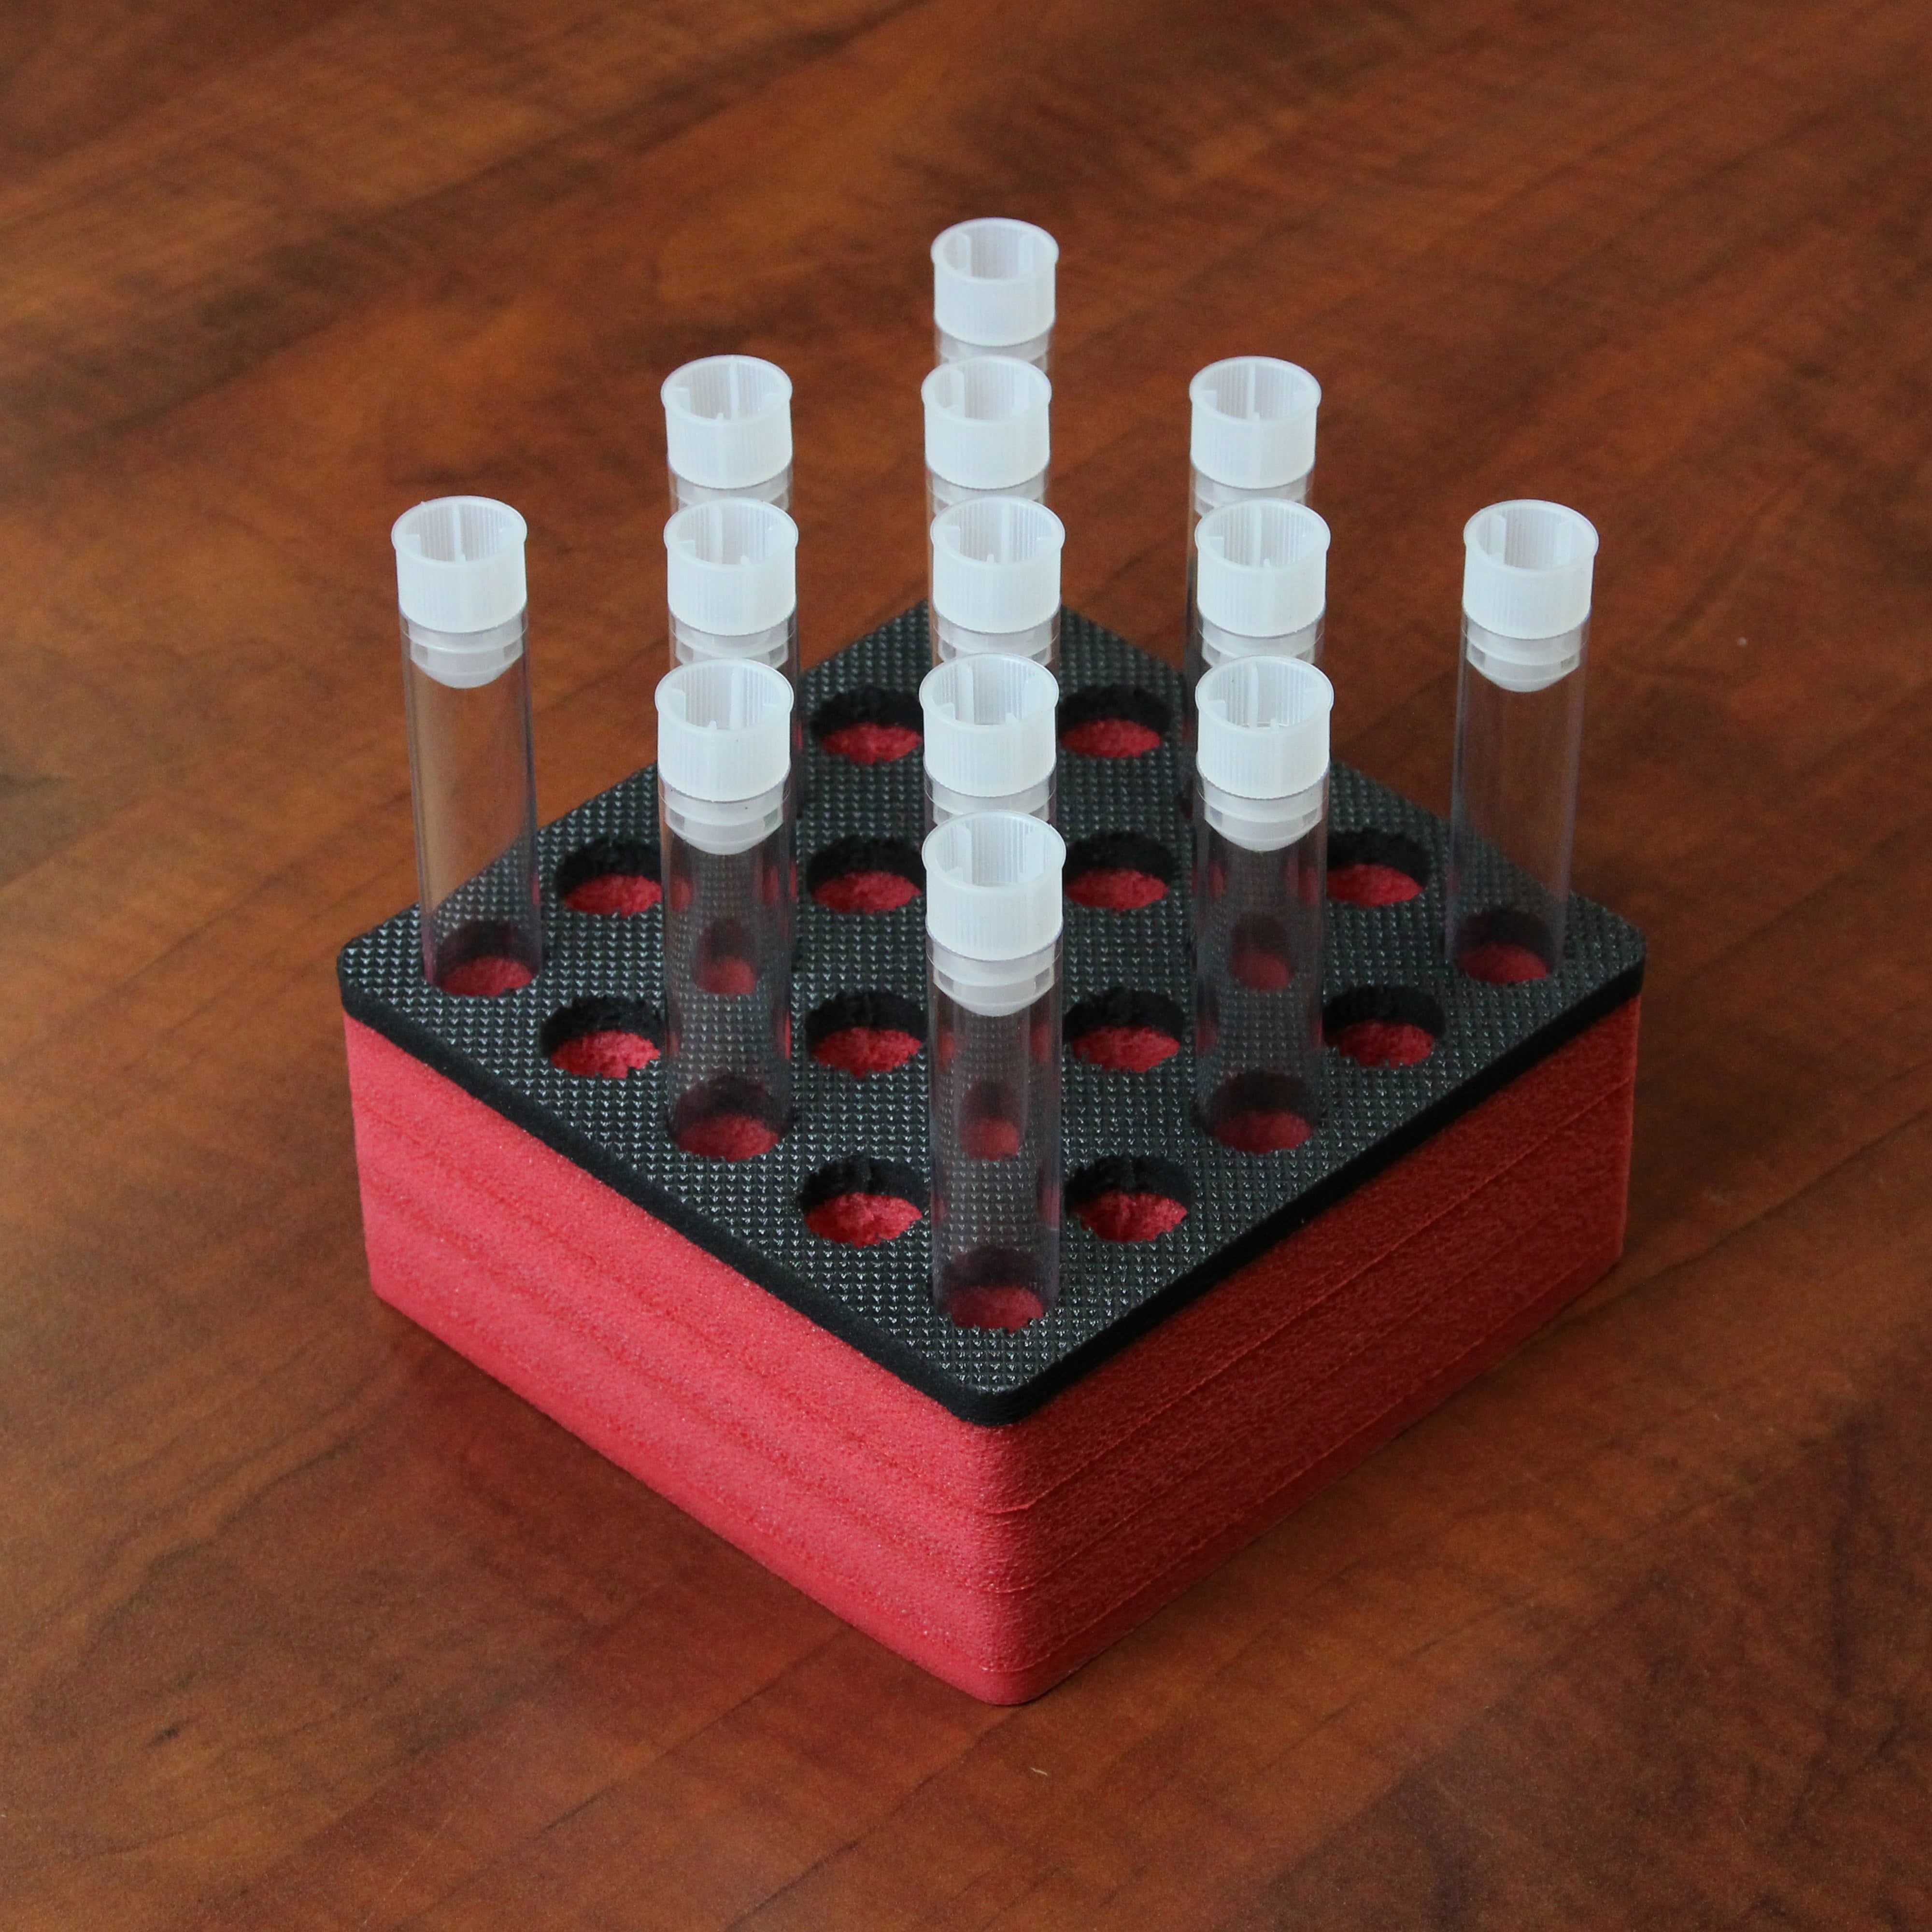 Polar Whale Test Tube Organizer Red and Black Foam Storage Rack Stand Transport Holds 25 Tubes Fits up to 17mm Diameter Tubes